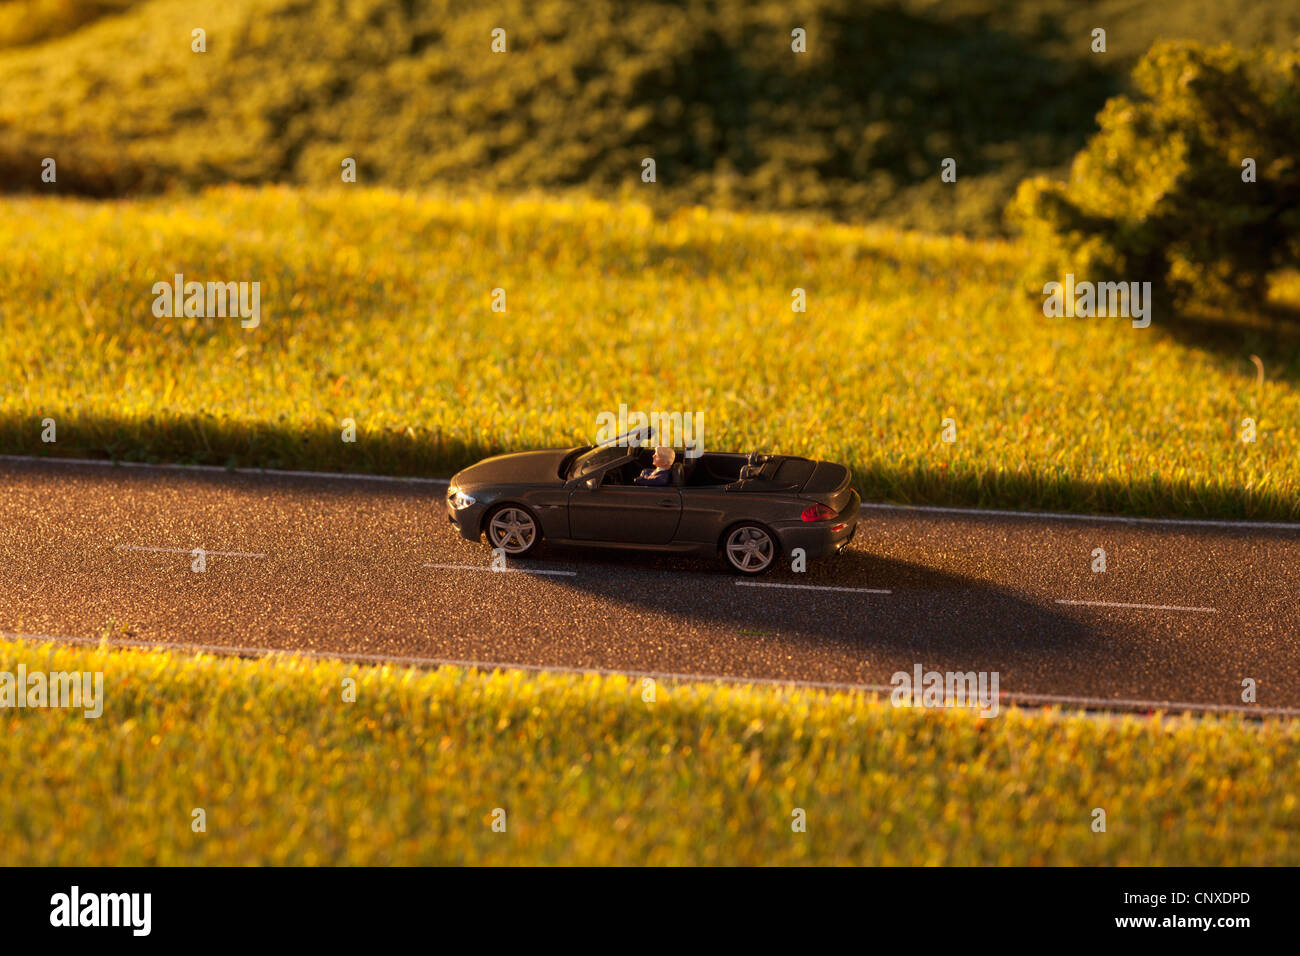 A diorama of a miniature man driving a toy convertible sports car on a rural road Stock Photo